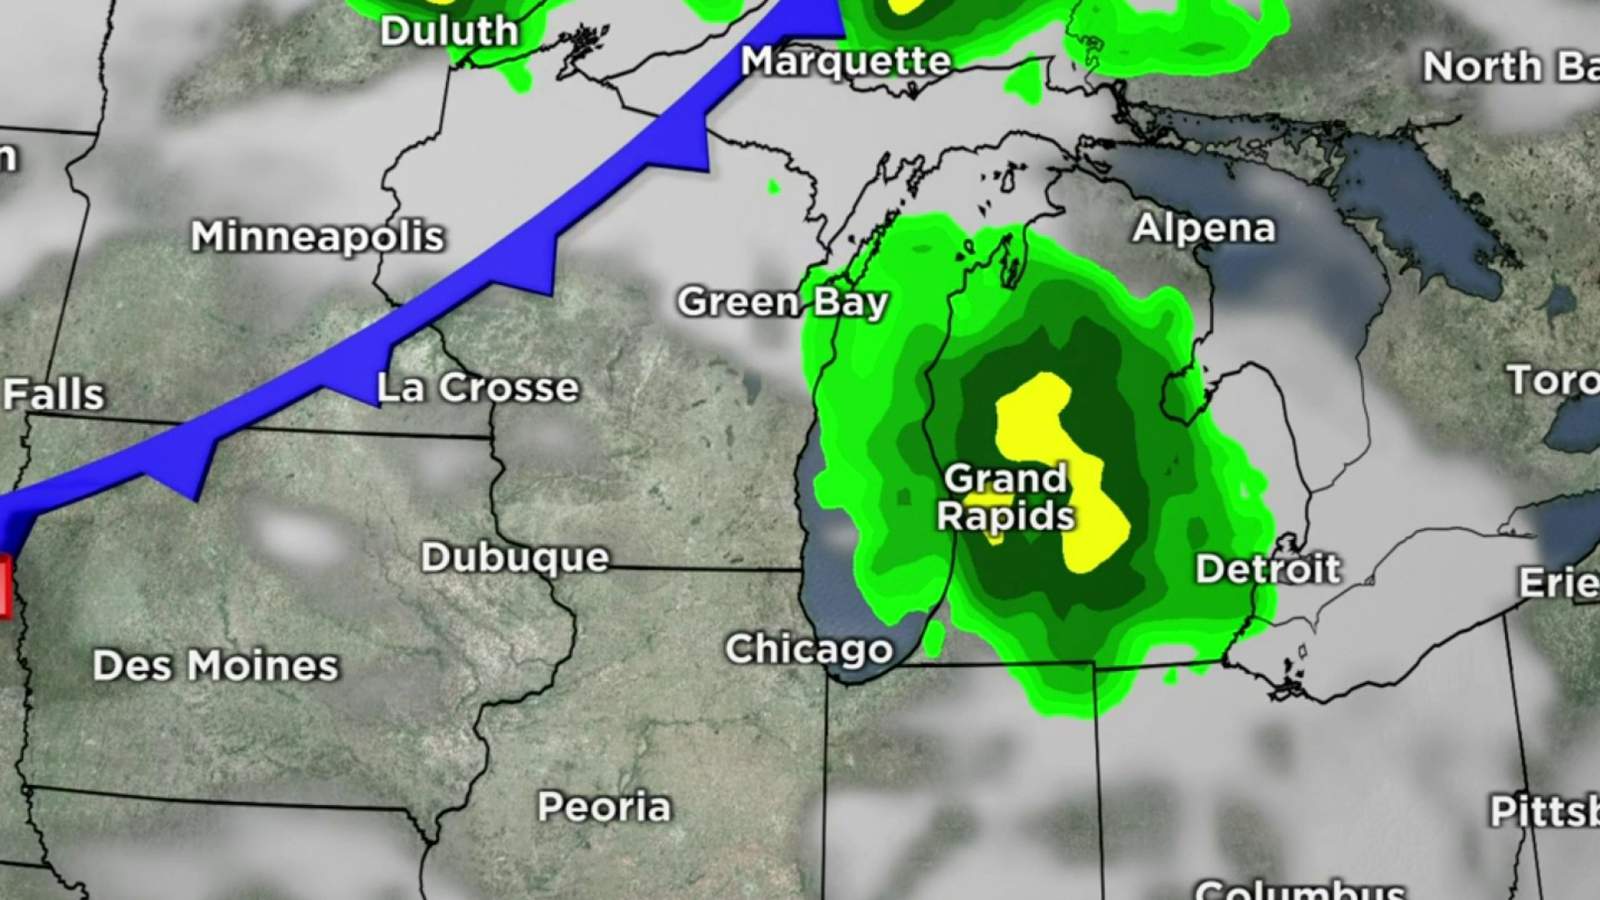 Metro Detroit weather: Strong wind gusts, rain chances over next three days